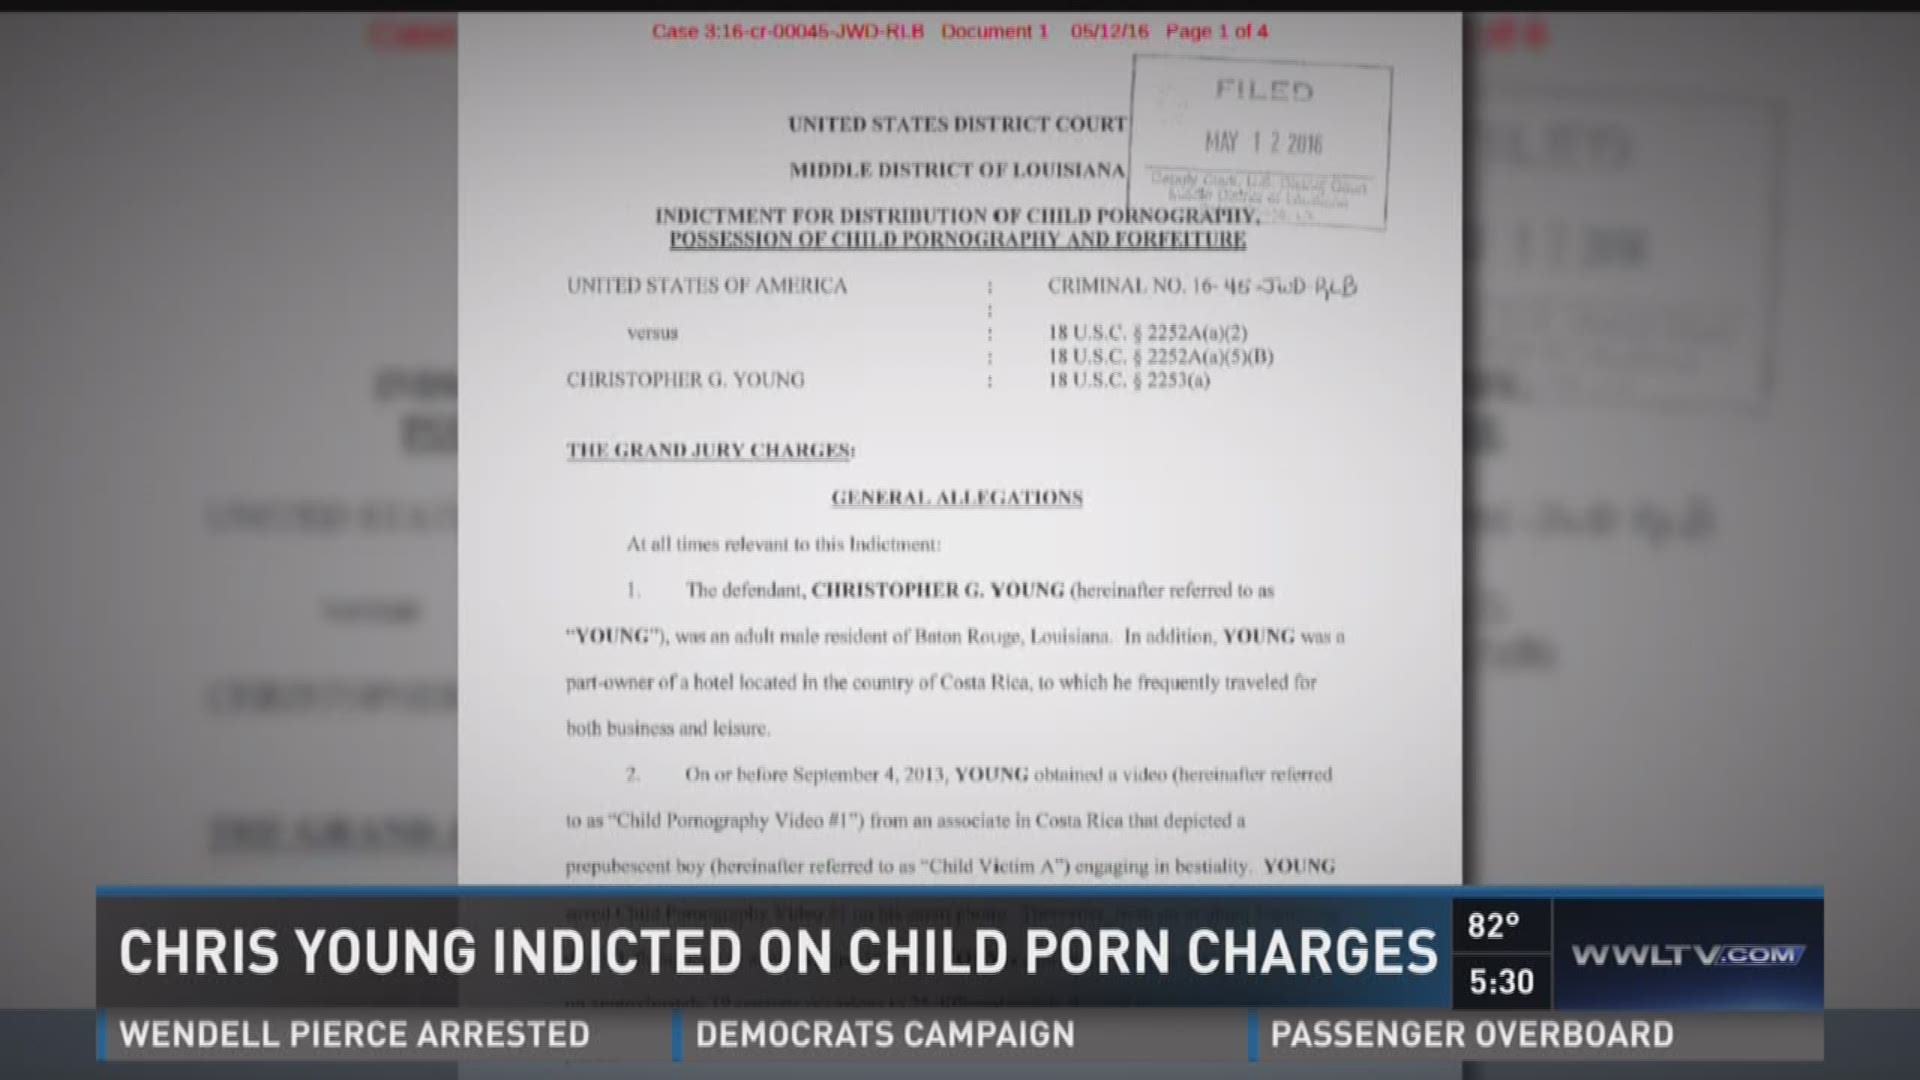 Chris Young, brother of former JP President and a prominent lawyer, has been indicted on child porn charges.